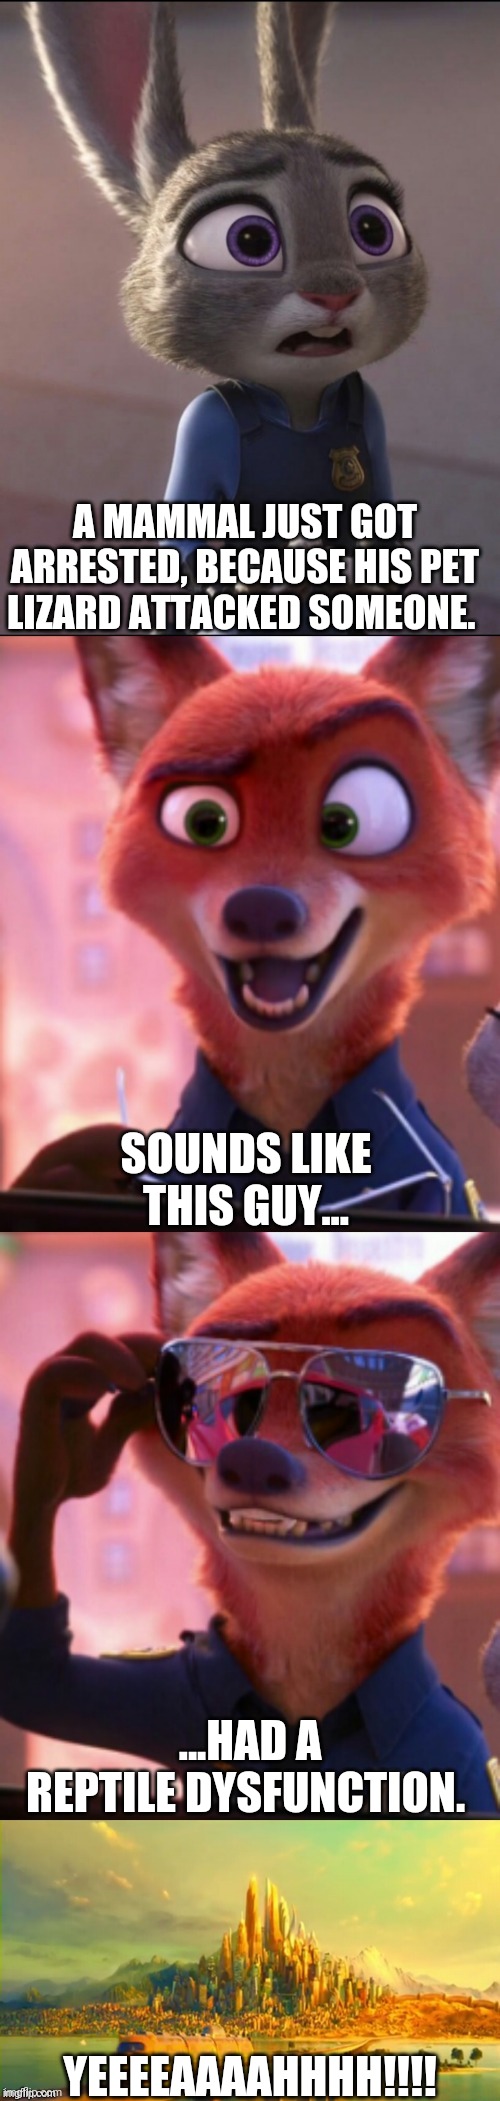 CSI: Zootopia 32 | A MAMMAL JUST GOT ARRESTED, BECAUSE HIS PET LIZARD ATTACKED SOMEONE. SOUNDS LIKE THIS GUY... ...HAD A REPTILE DYSFUNCTION. YEEEEAAAAHHHH!!!! | image tagged in csi zootopia,zootopia,judy hopps,nick wilde,parody,funny | made w/ Imgflip meme maker